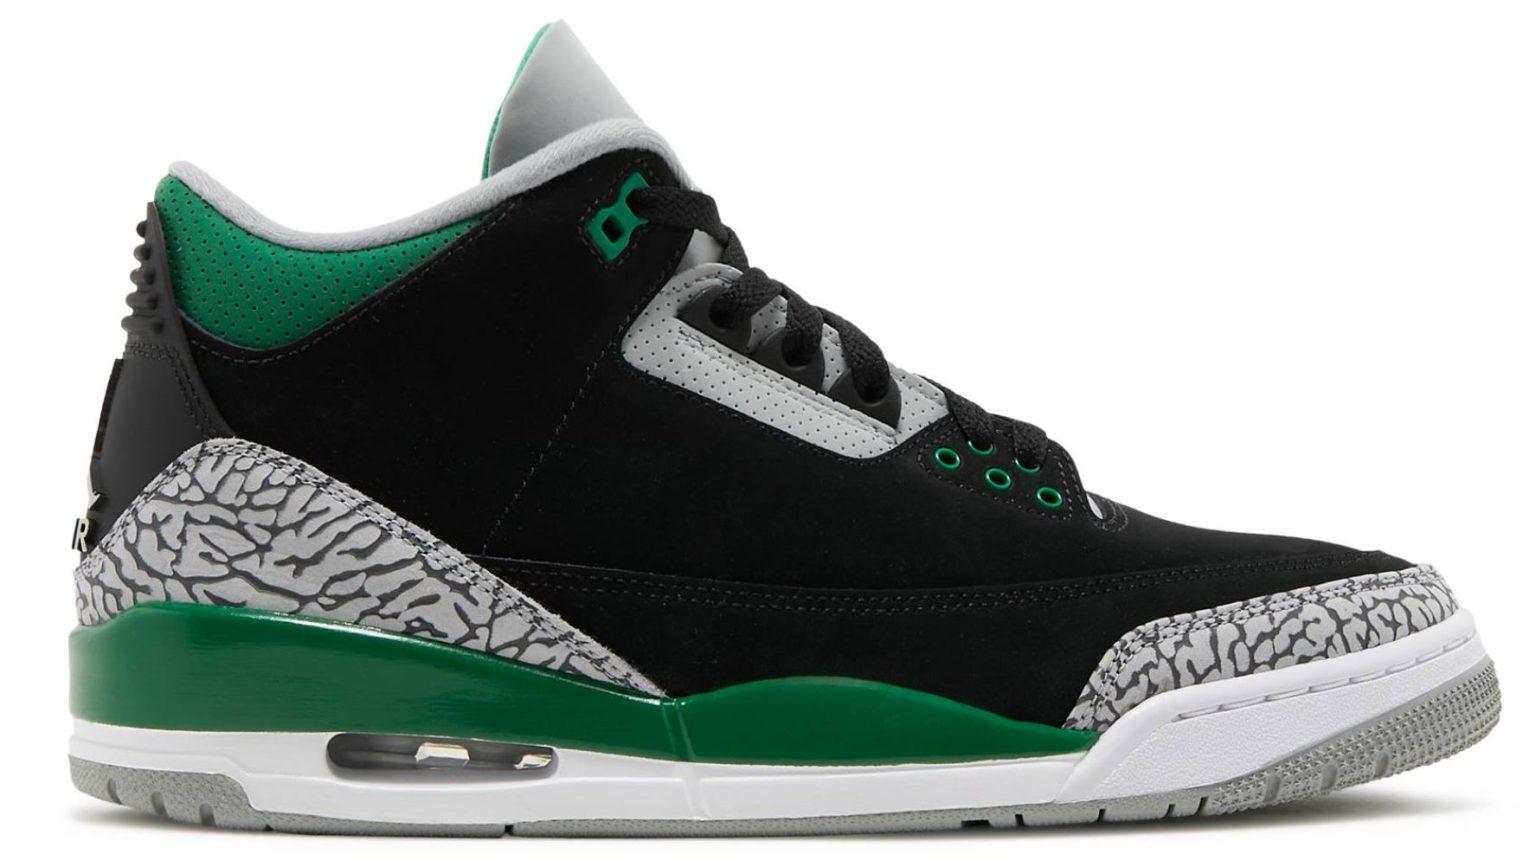 Nike Air Jordan 3 Size Chart and Fitting